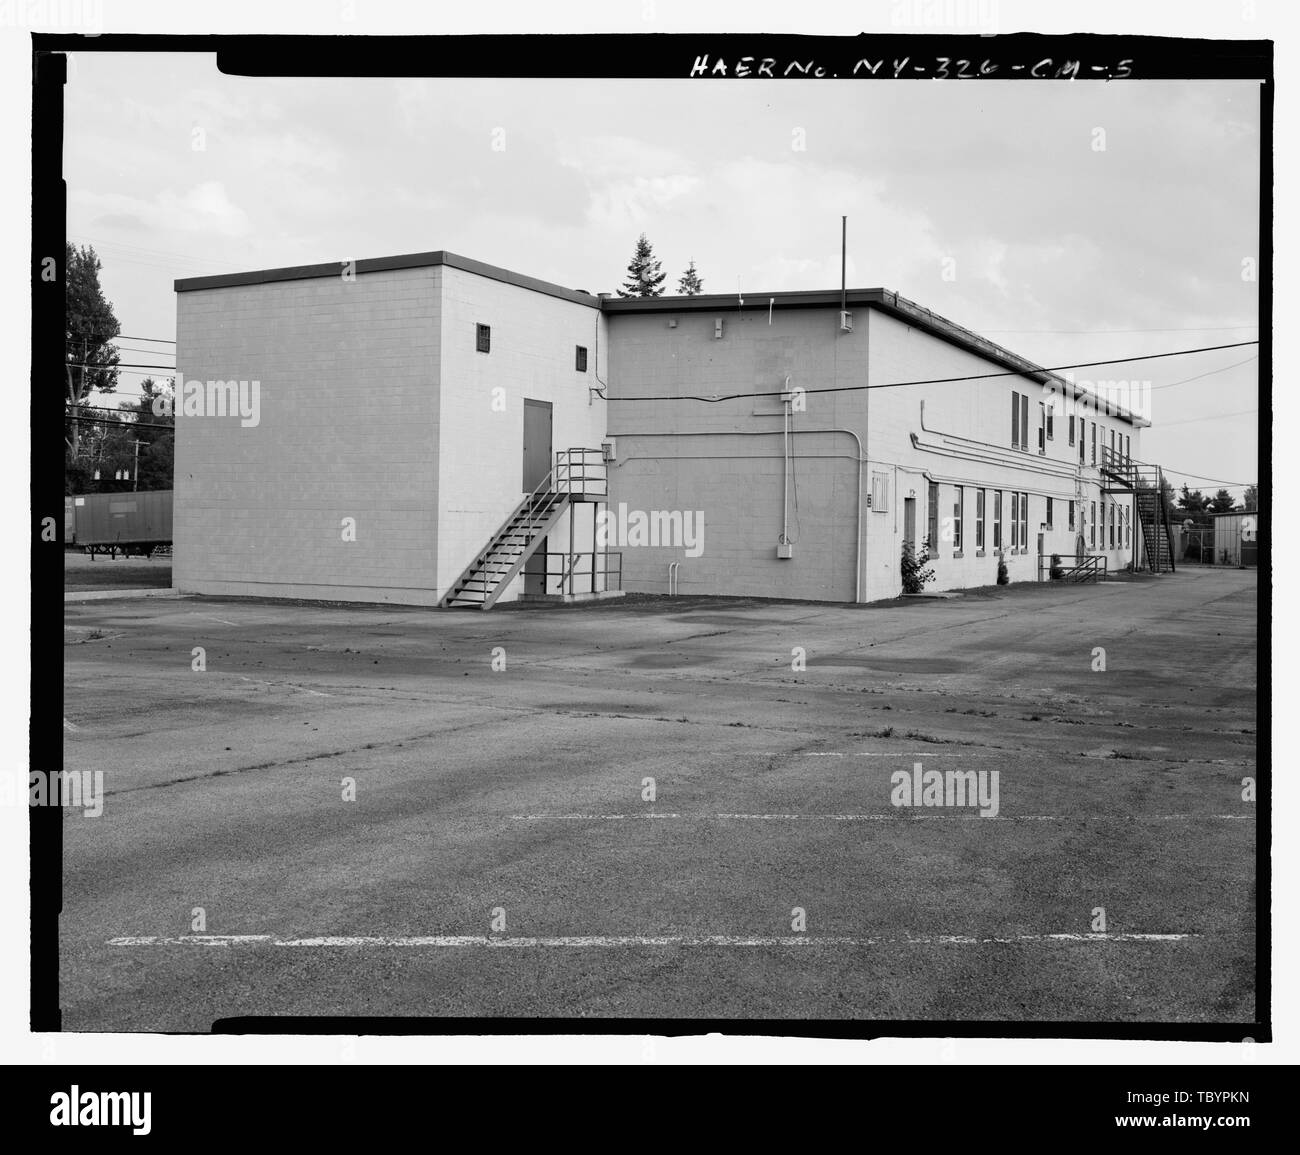 NORTH (SIDE) AND WEST (REAR) ELEVATIONS OF BUILDING. VIEW TO SOUTHEAST.  Plattsburgh Air Force Base, Wing Headquarters Building, Arizona Avenue, Plattsburgh, Clinton County, NY Stock Photo